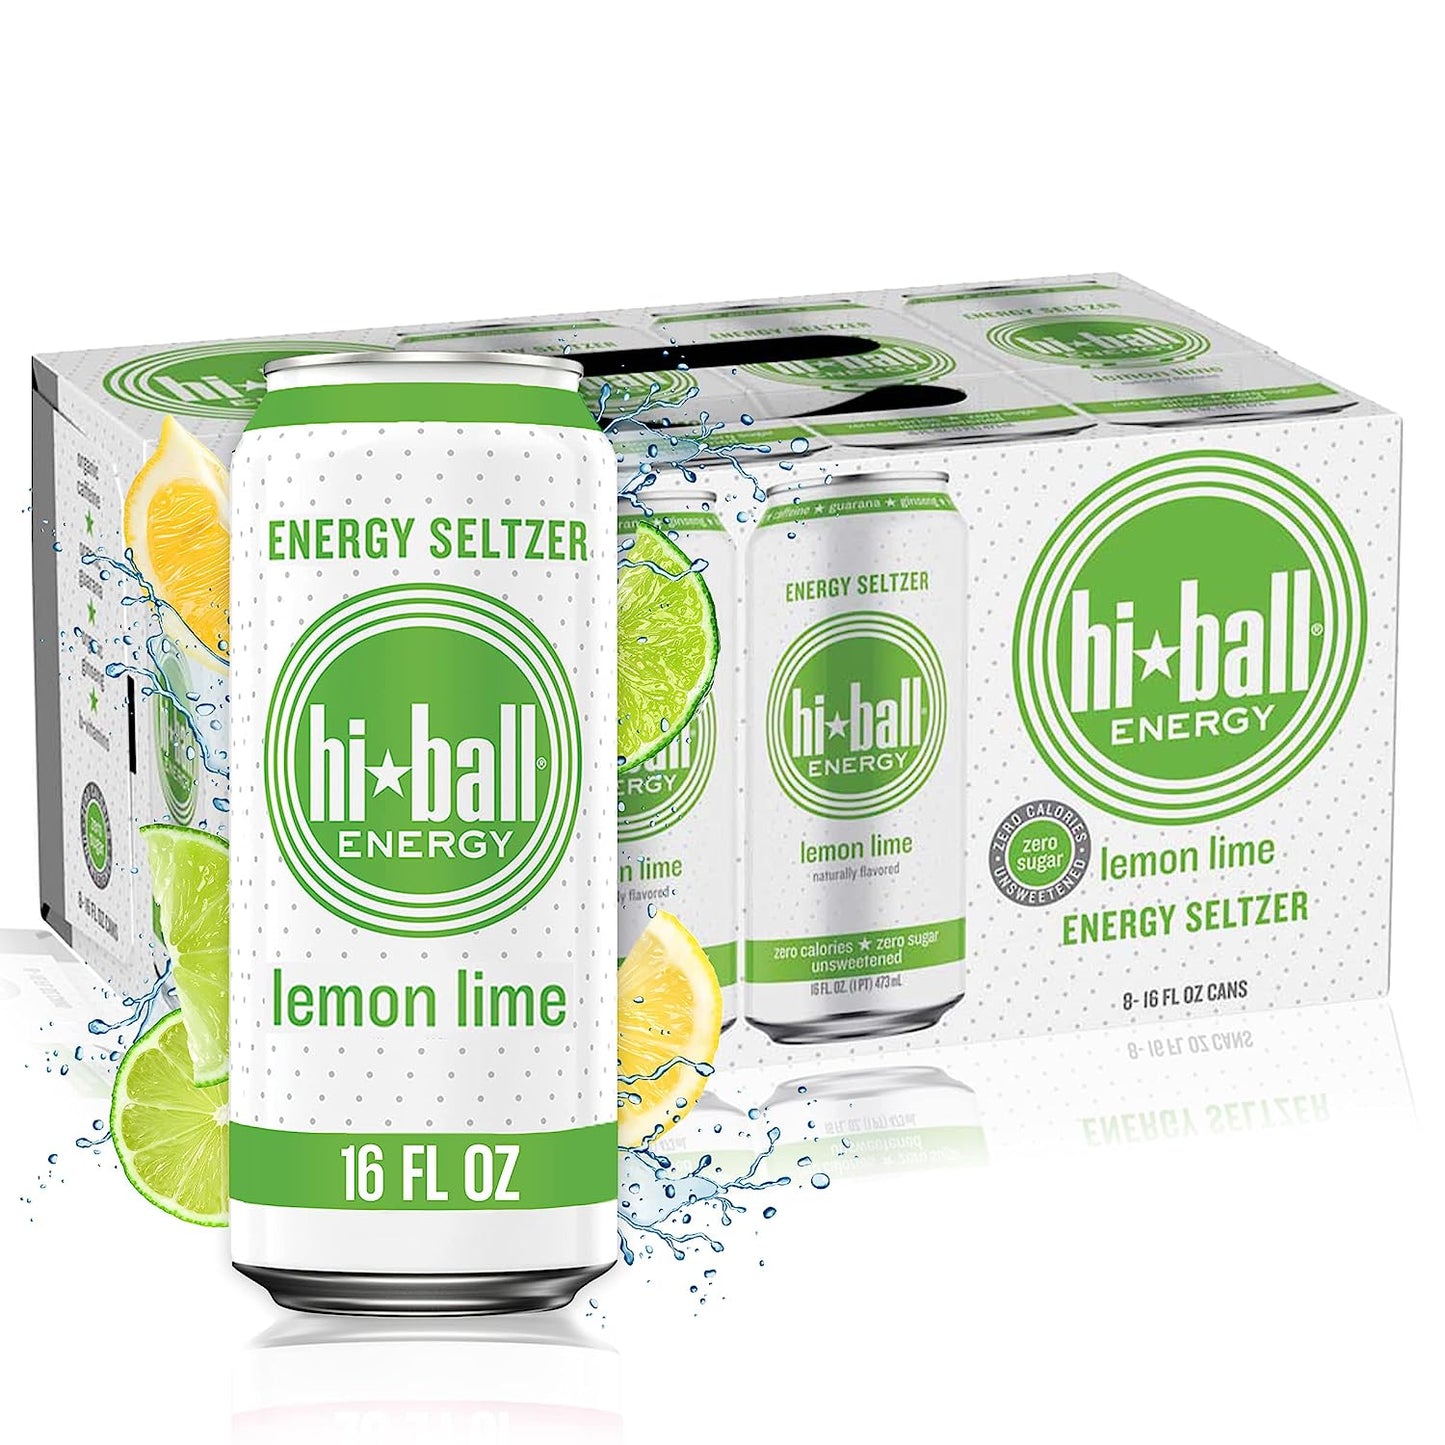 Hiball Clean Energy Seltzer Water, Caffeinated Sparkling Water Made with Vitamin B12 and Vitamin B6, Sugar Free (8 pack of 16 Fl Oz), Lemon Lime